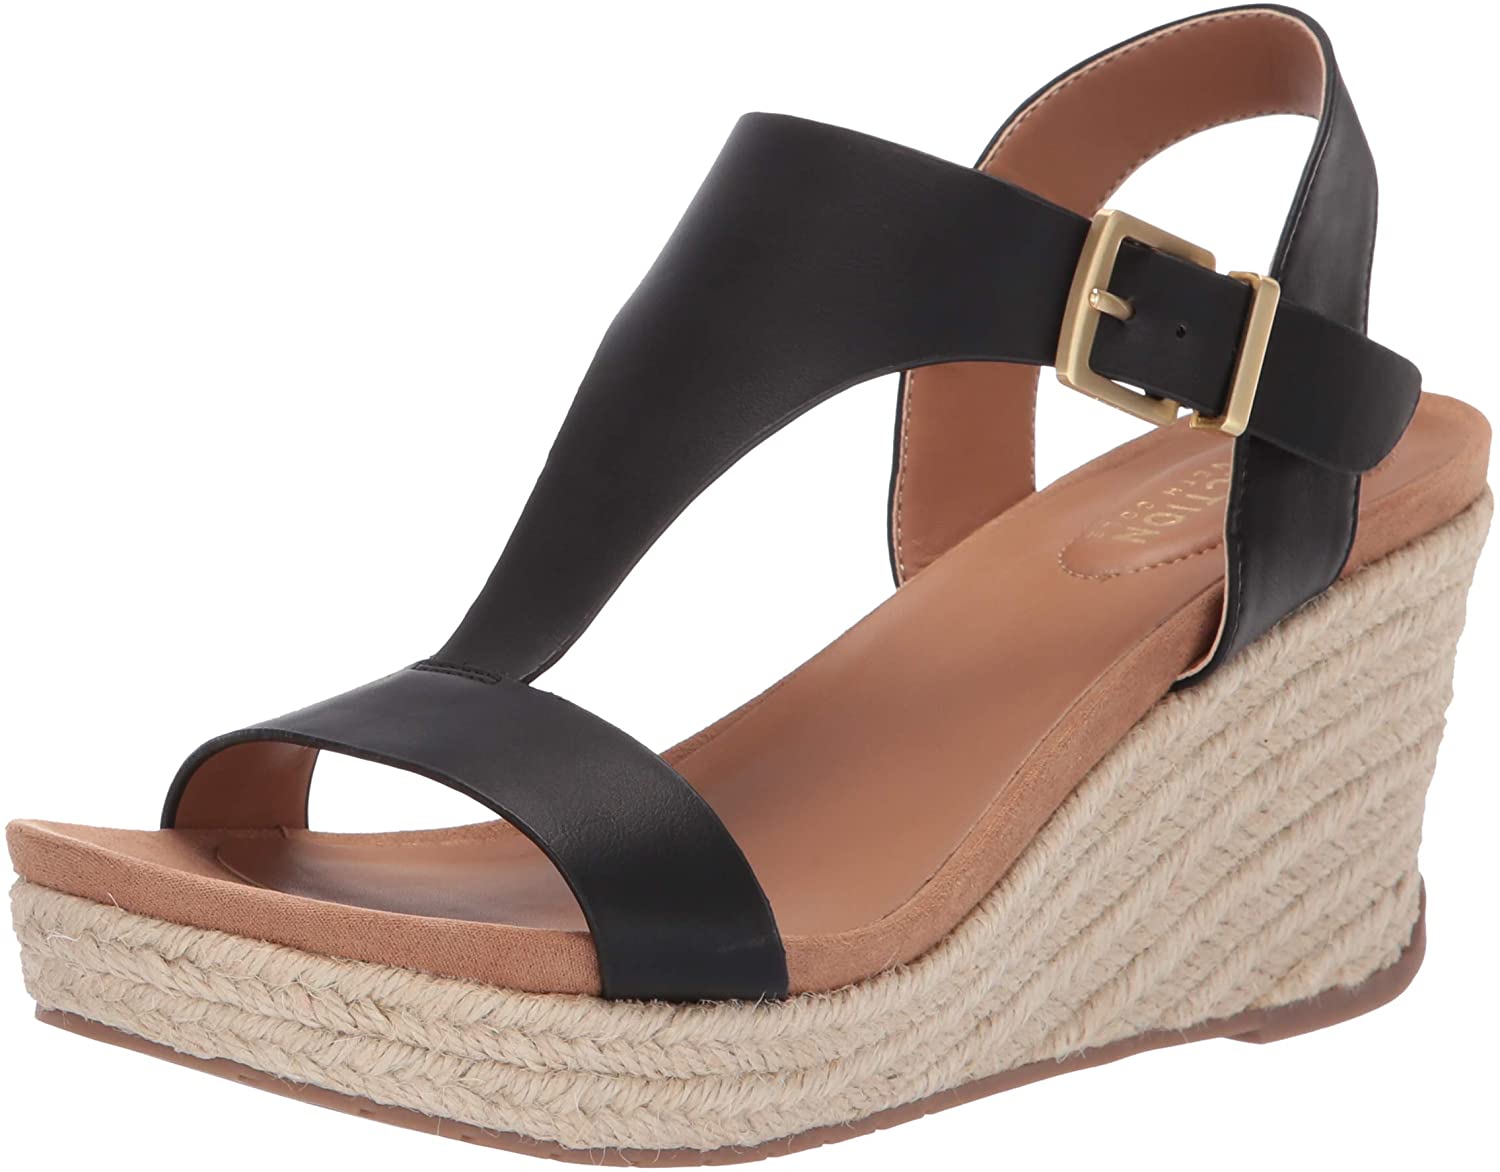 Pre-owned Visit The Kenneth Cole Reaction Store Kenneth Cole Reaction Women's T-strap Wedge Sandal In Black